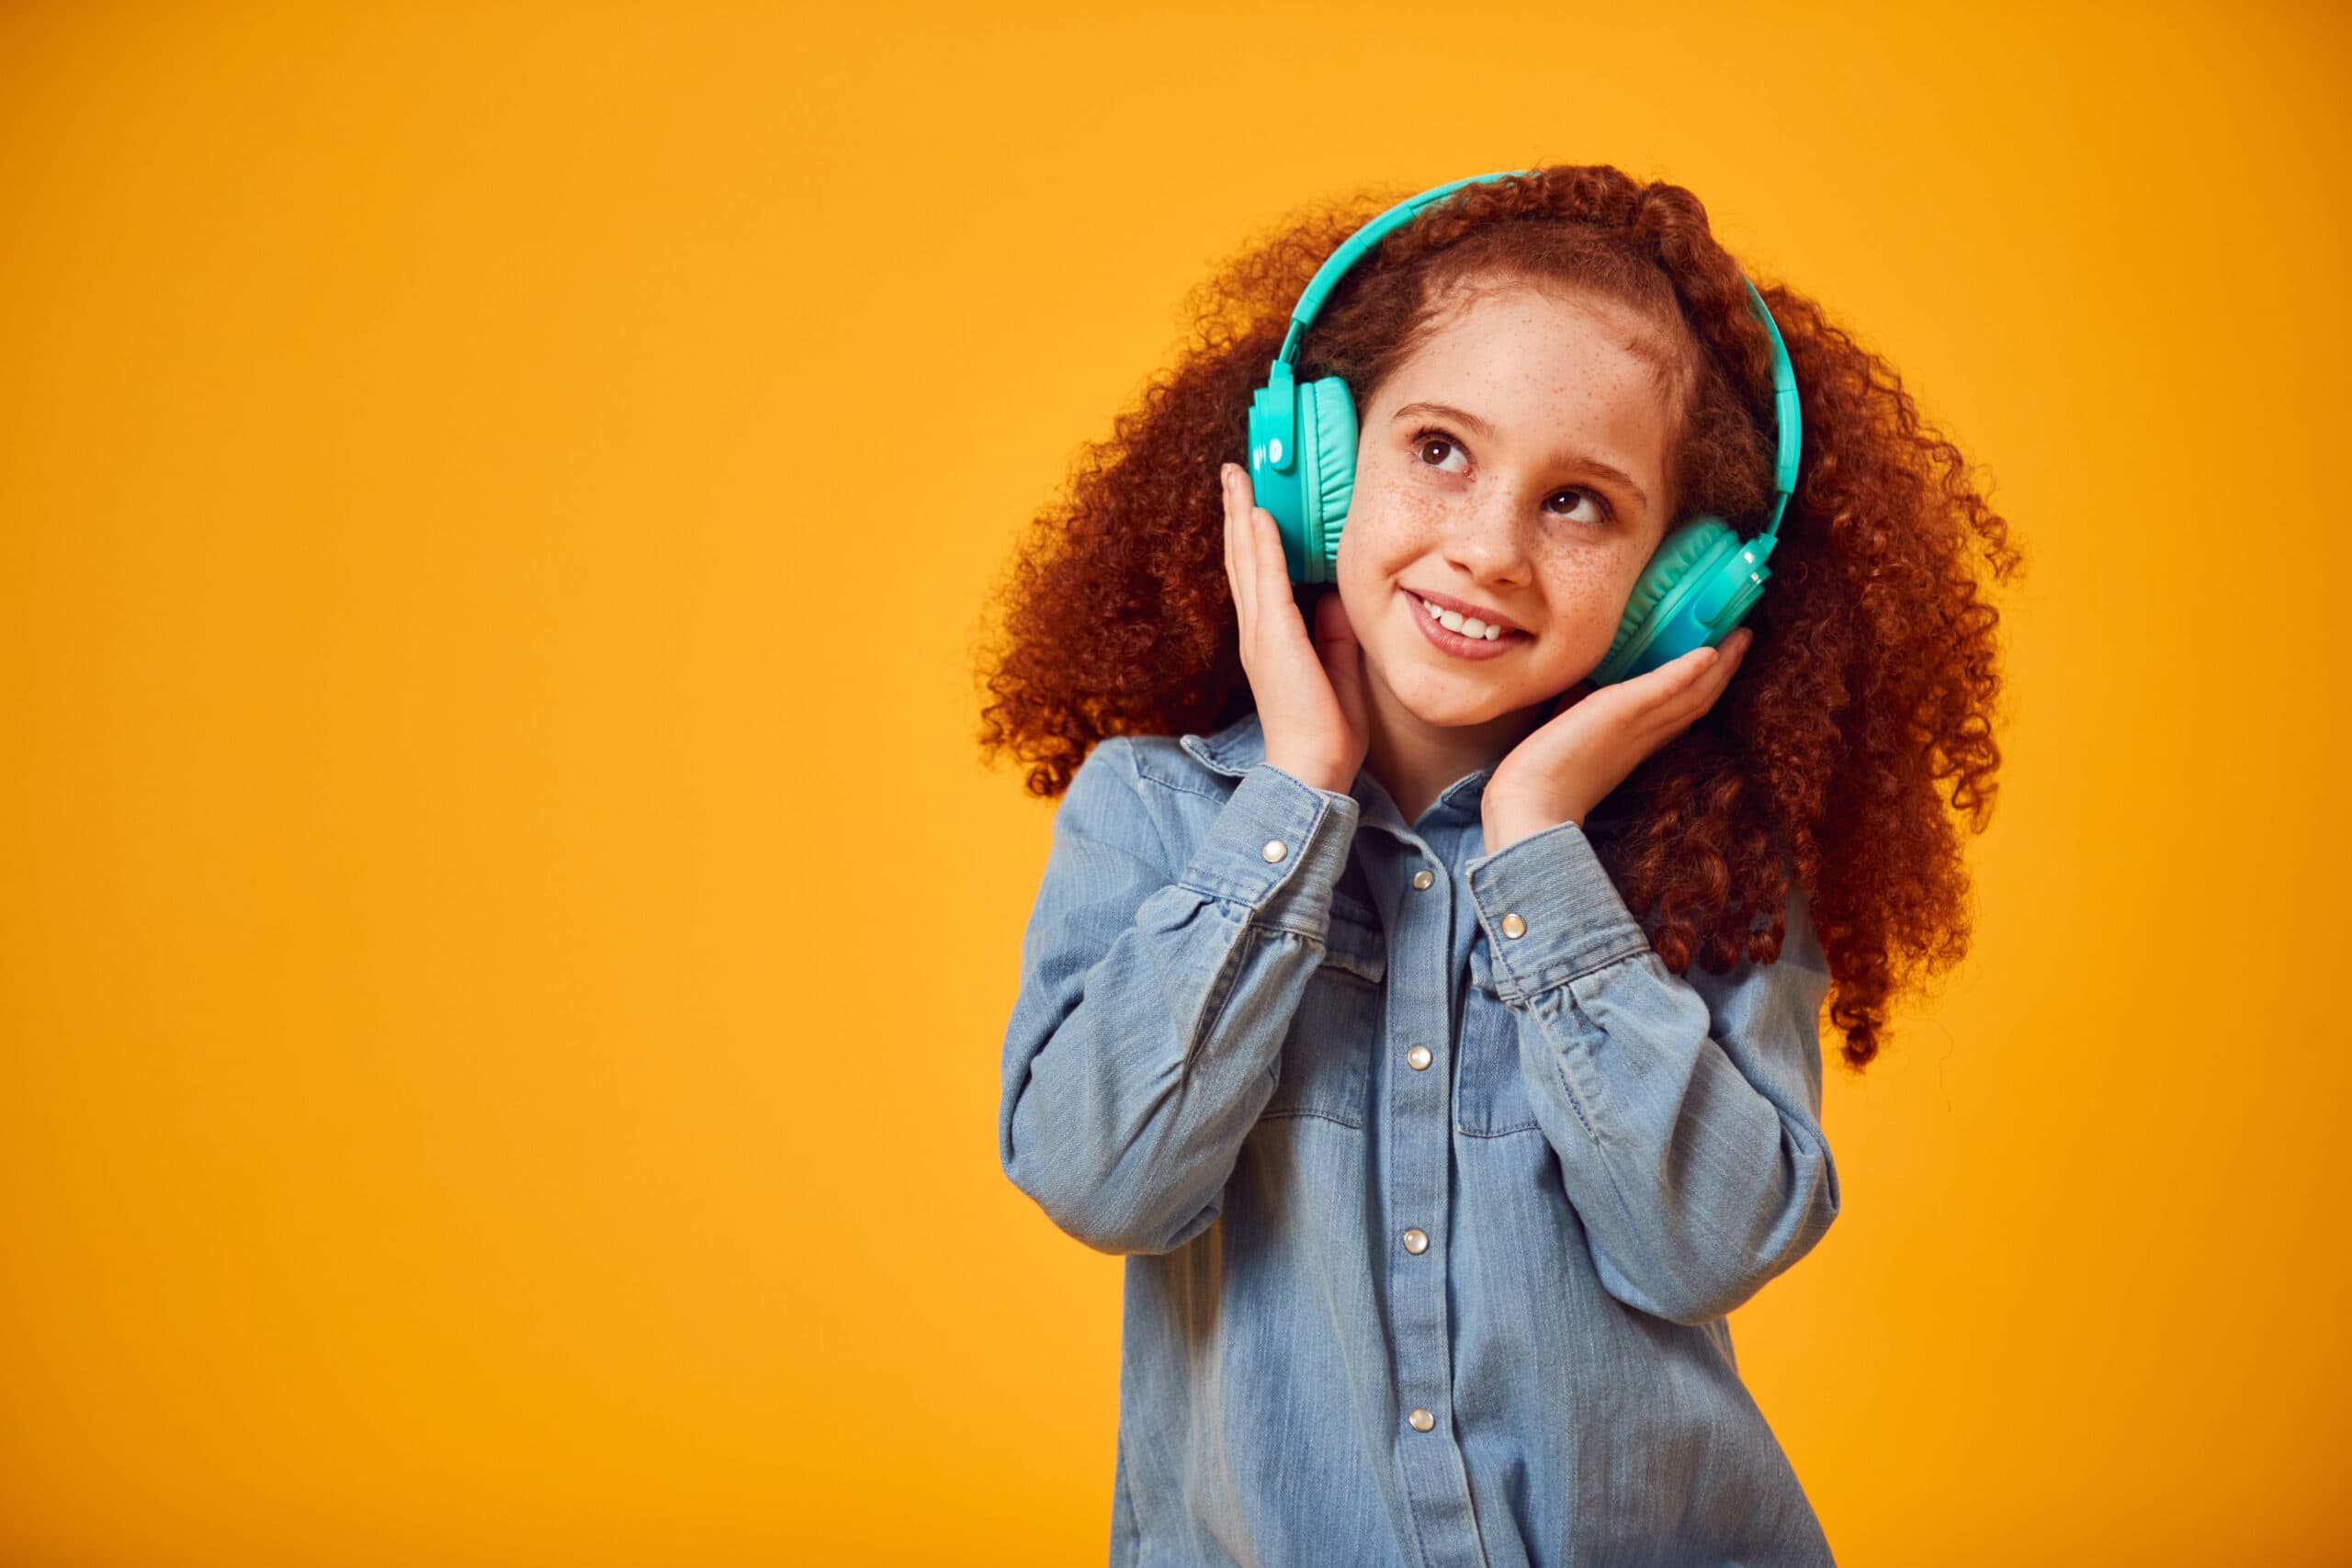 Studio Shot Of Smiling Young Girl Listening To Music On Headphones Against Yellow Background